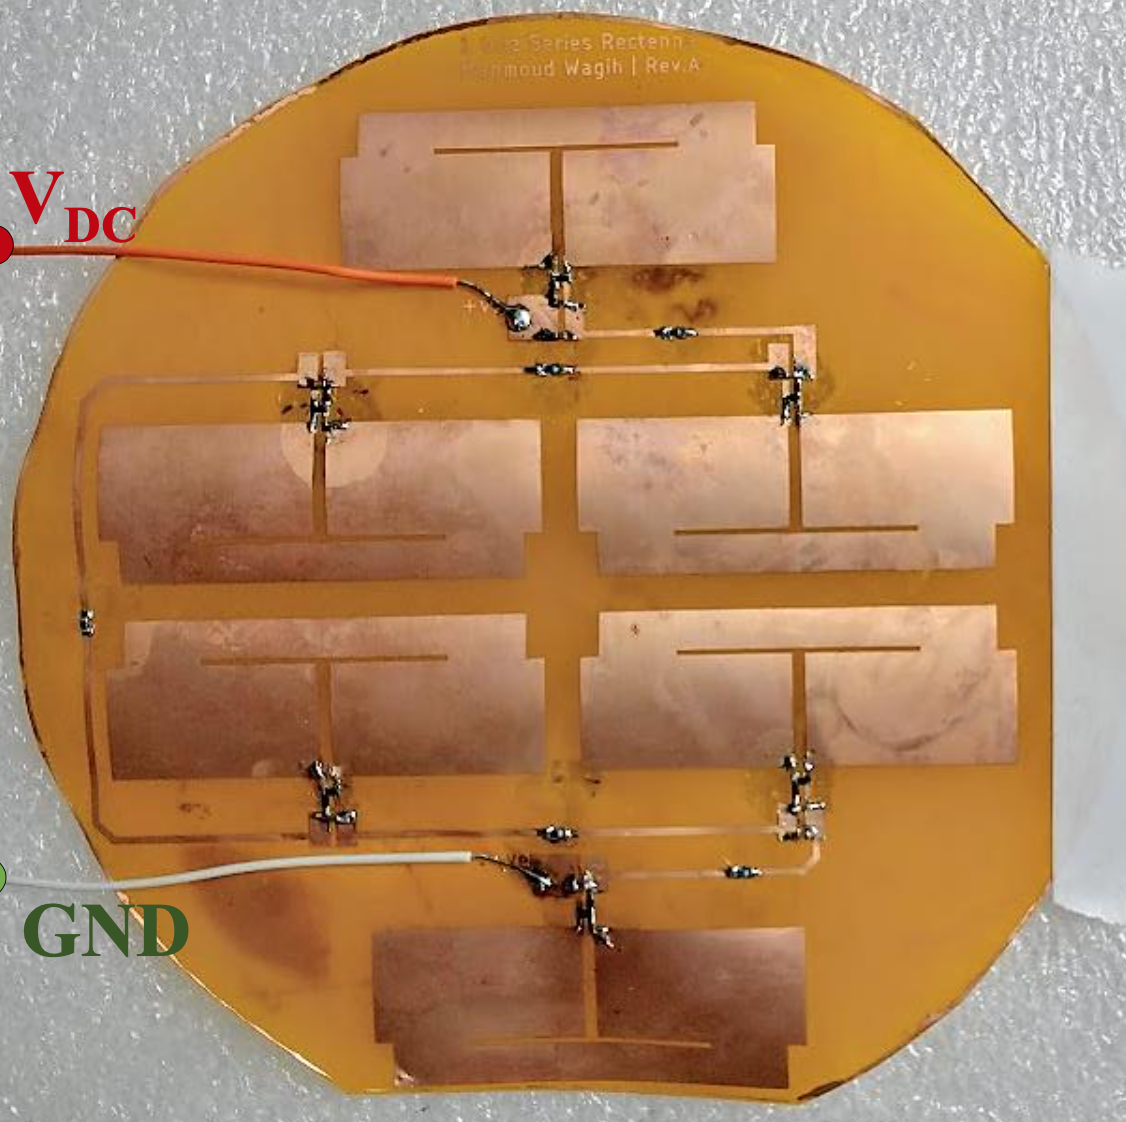 antennas and electronic circuits on a flexible film